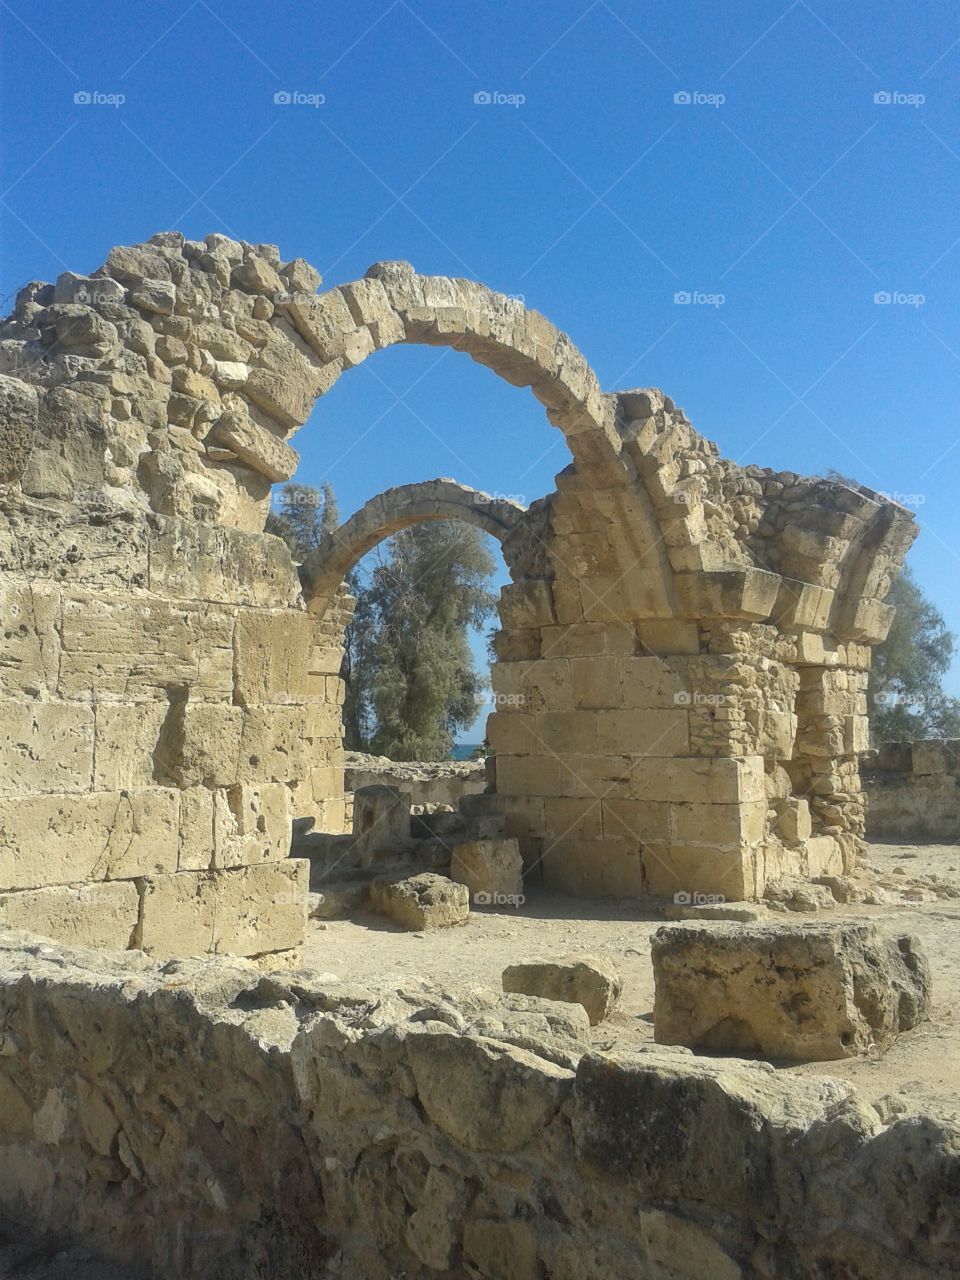 Arches in ruin. ruins at the Paphos Archeological Park